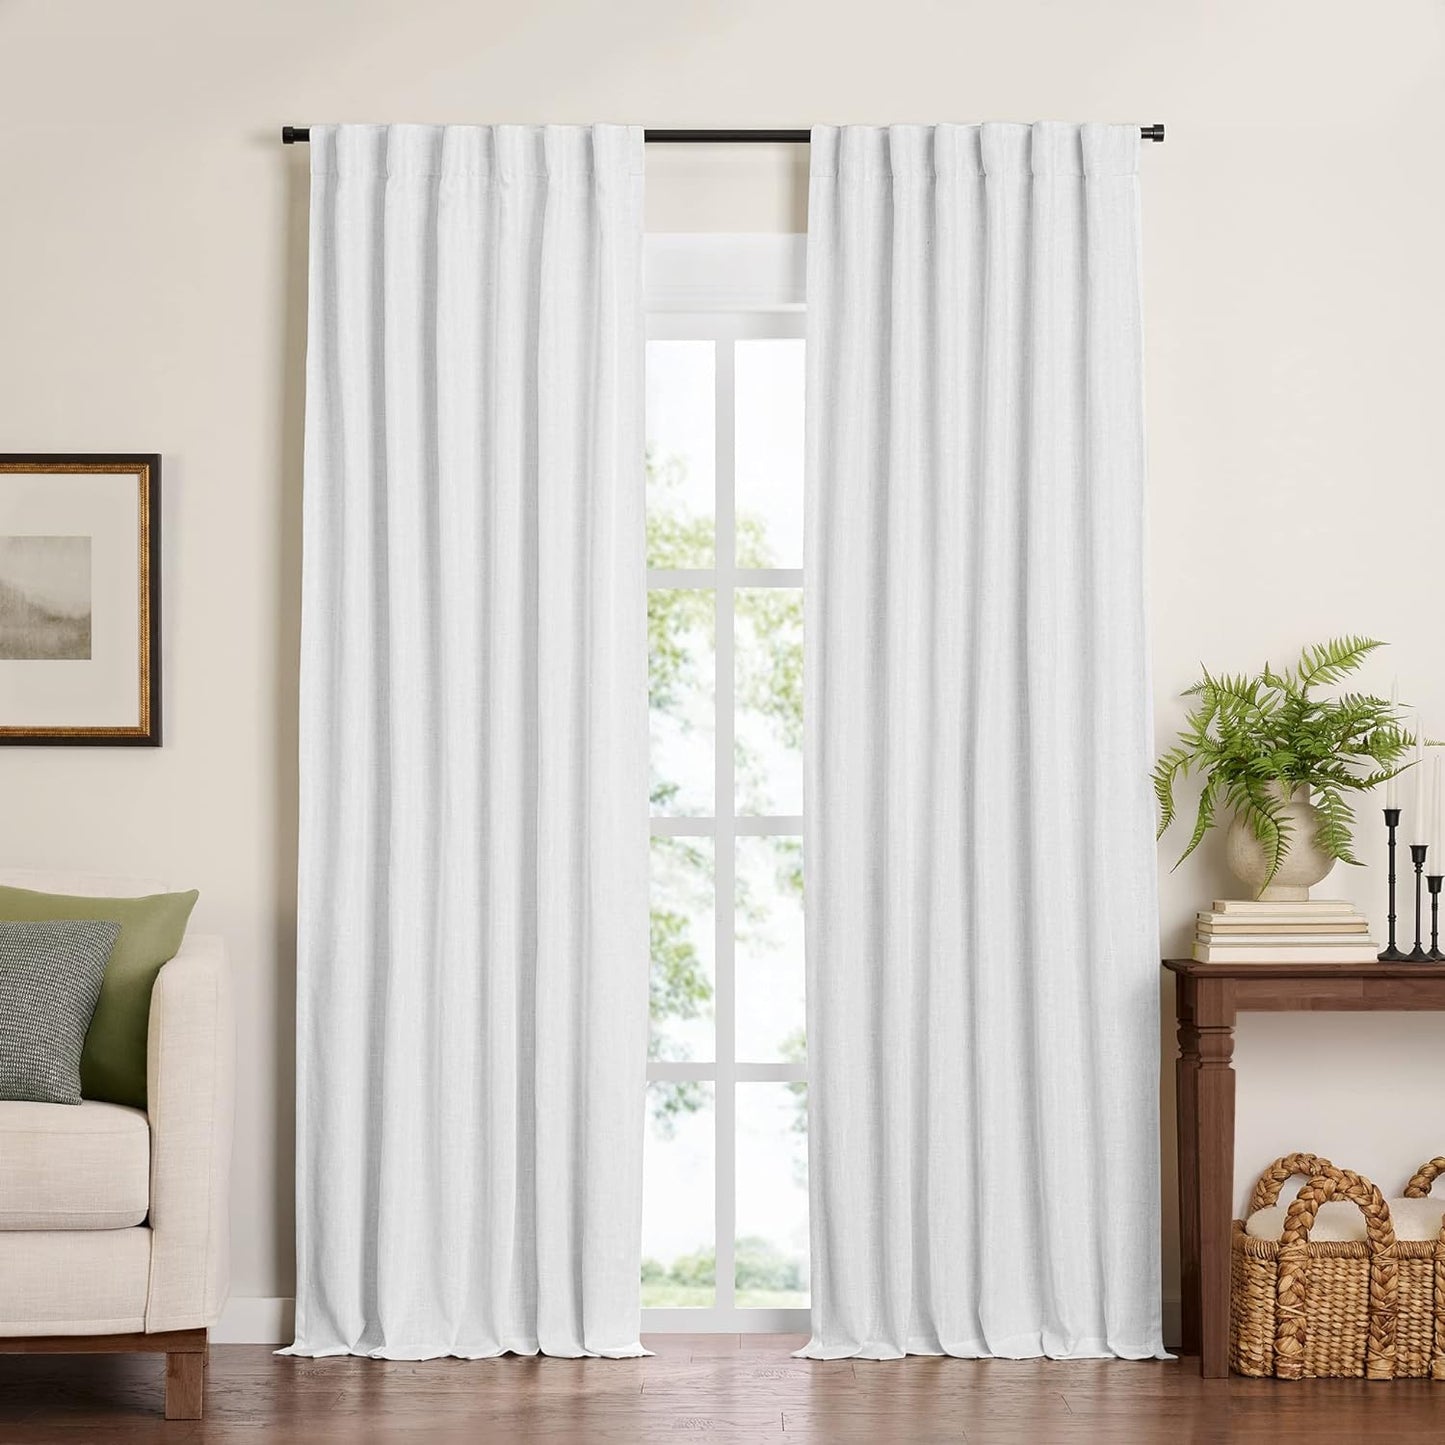 Elrene Home Fashions Harrow Solid Texture Blackout Single Window Curtain Panel, 52"X84", Natural  Elrene Home Fashions White 52"X84" (1 Panel) 